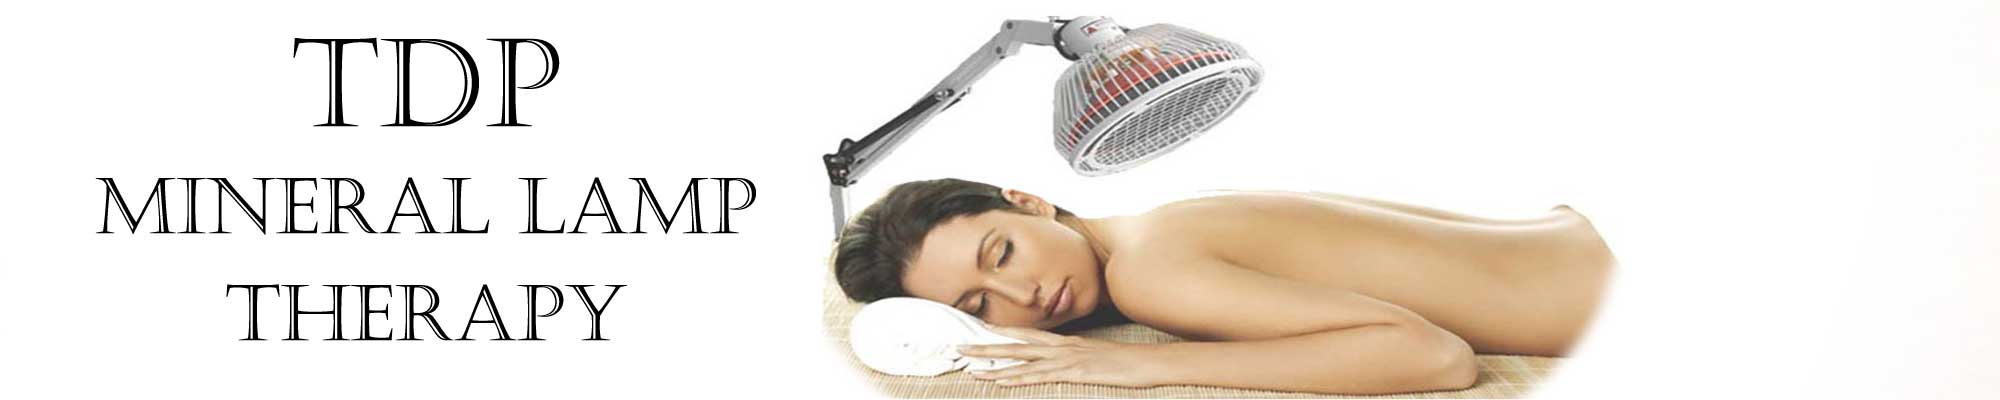 TDP Mineral Lamp therapy